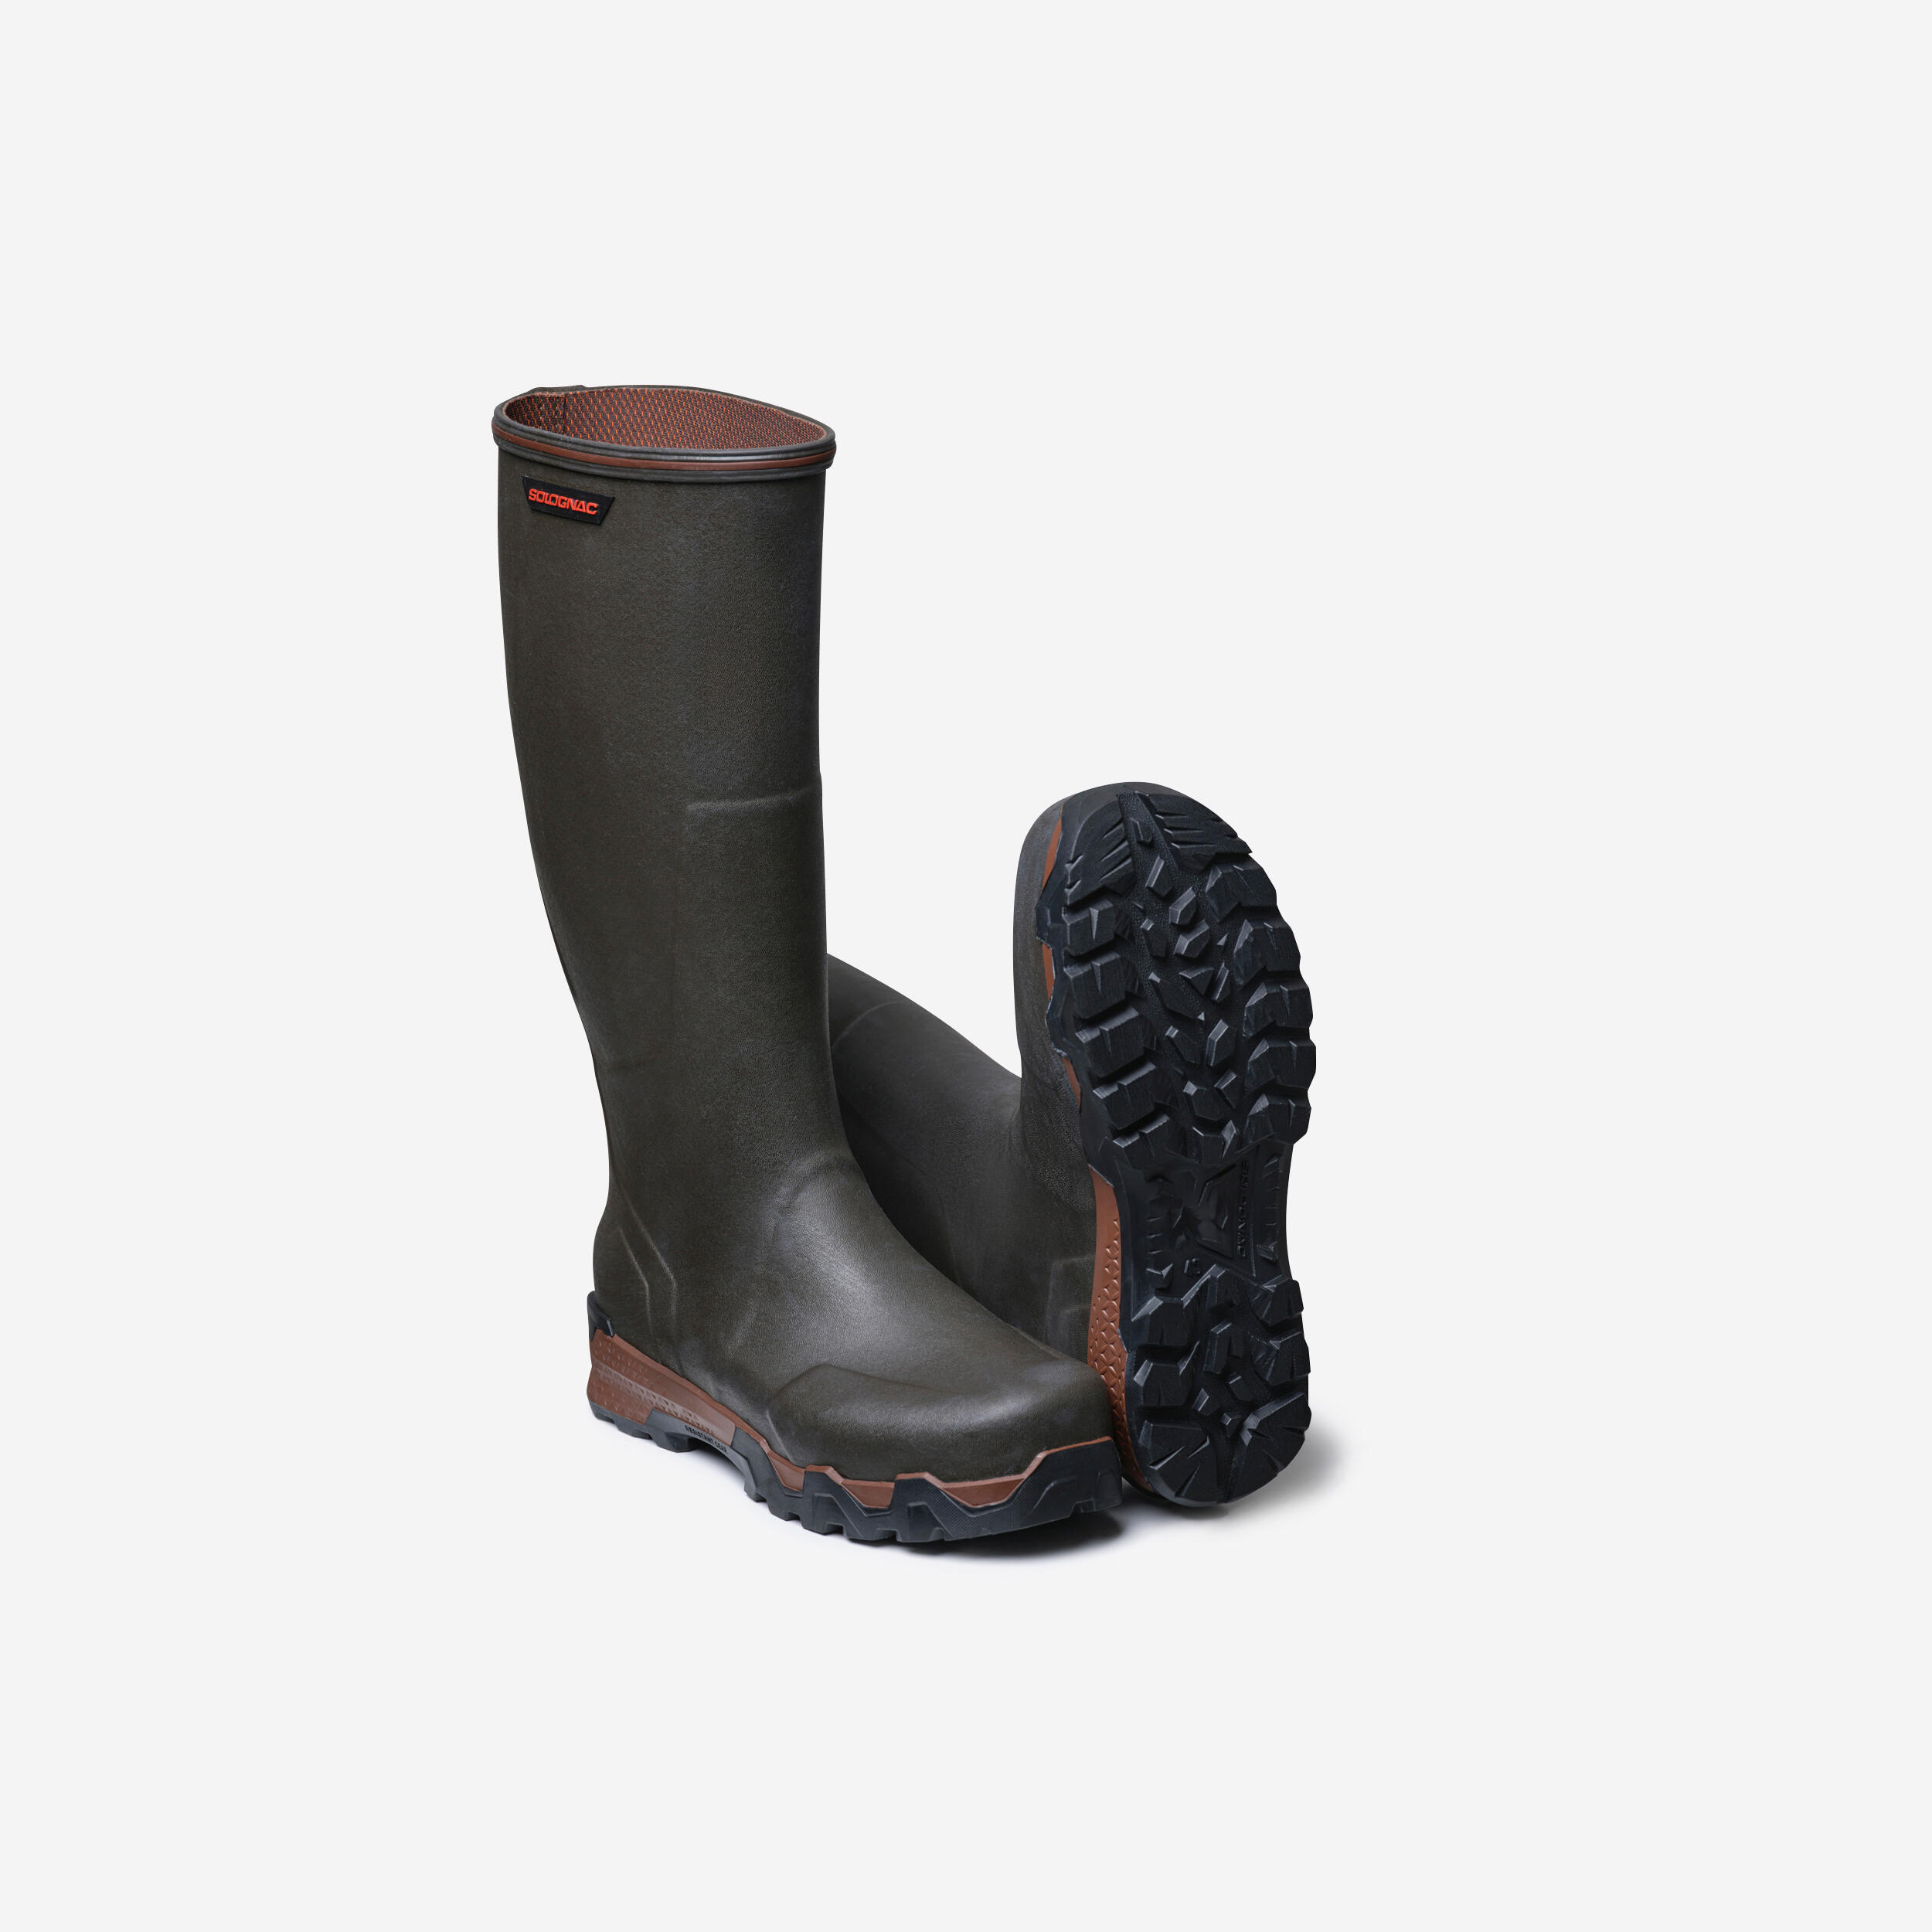 SOLOGNAC COMFORTABLE RUBBER HUNTING BOOTS RENFORT 900